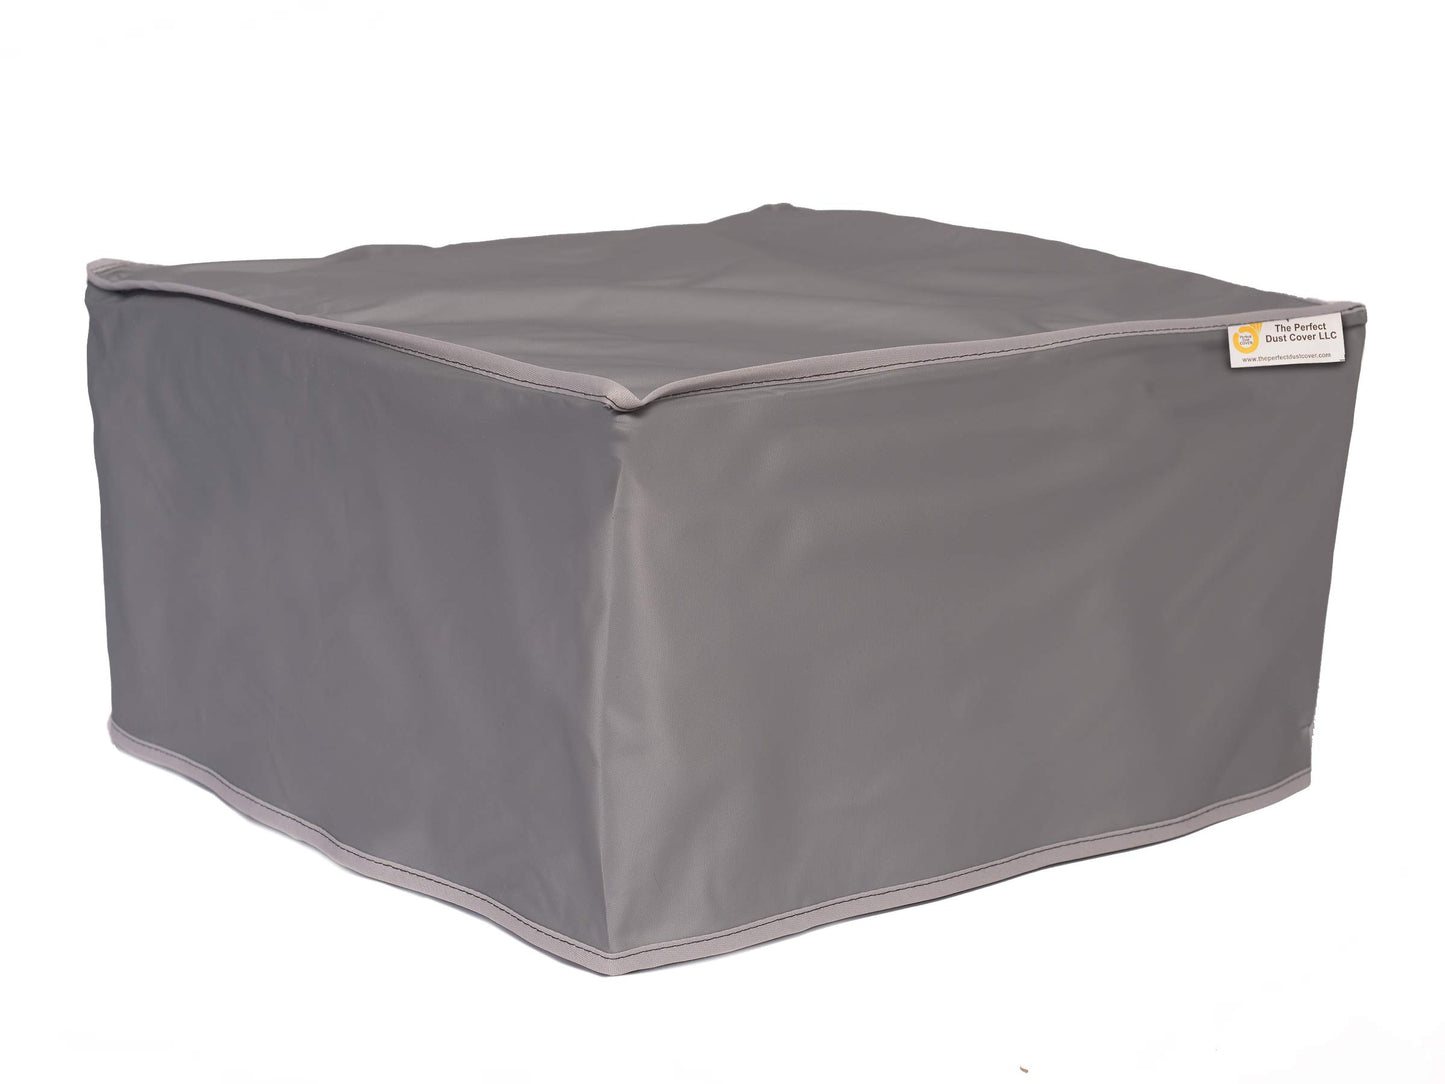 The Perfect Dust Cover, Silver Gray Vinyl Cover for Brother MFC-9340CDW Color Laser Printer, Anti Static and Waterproof Cover Dimensions 16.1''W x 19.1''D x 16.1''H by The Perfect Dust Cover LLC